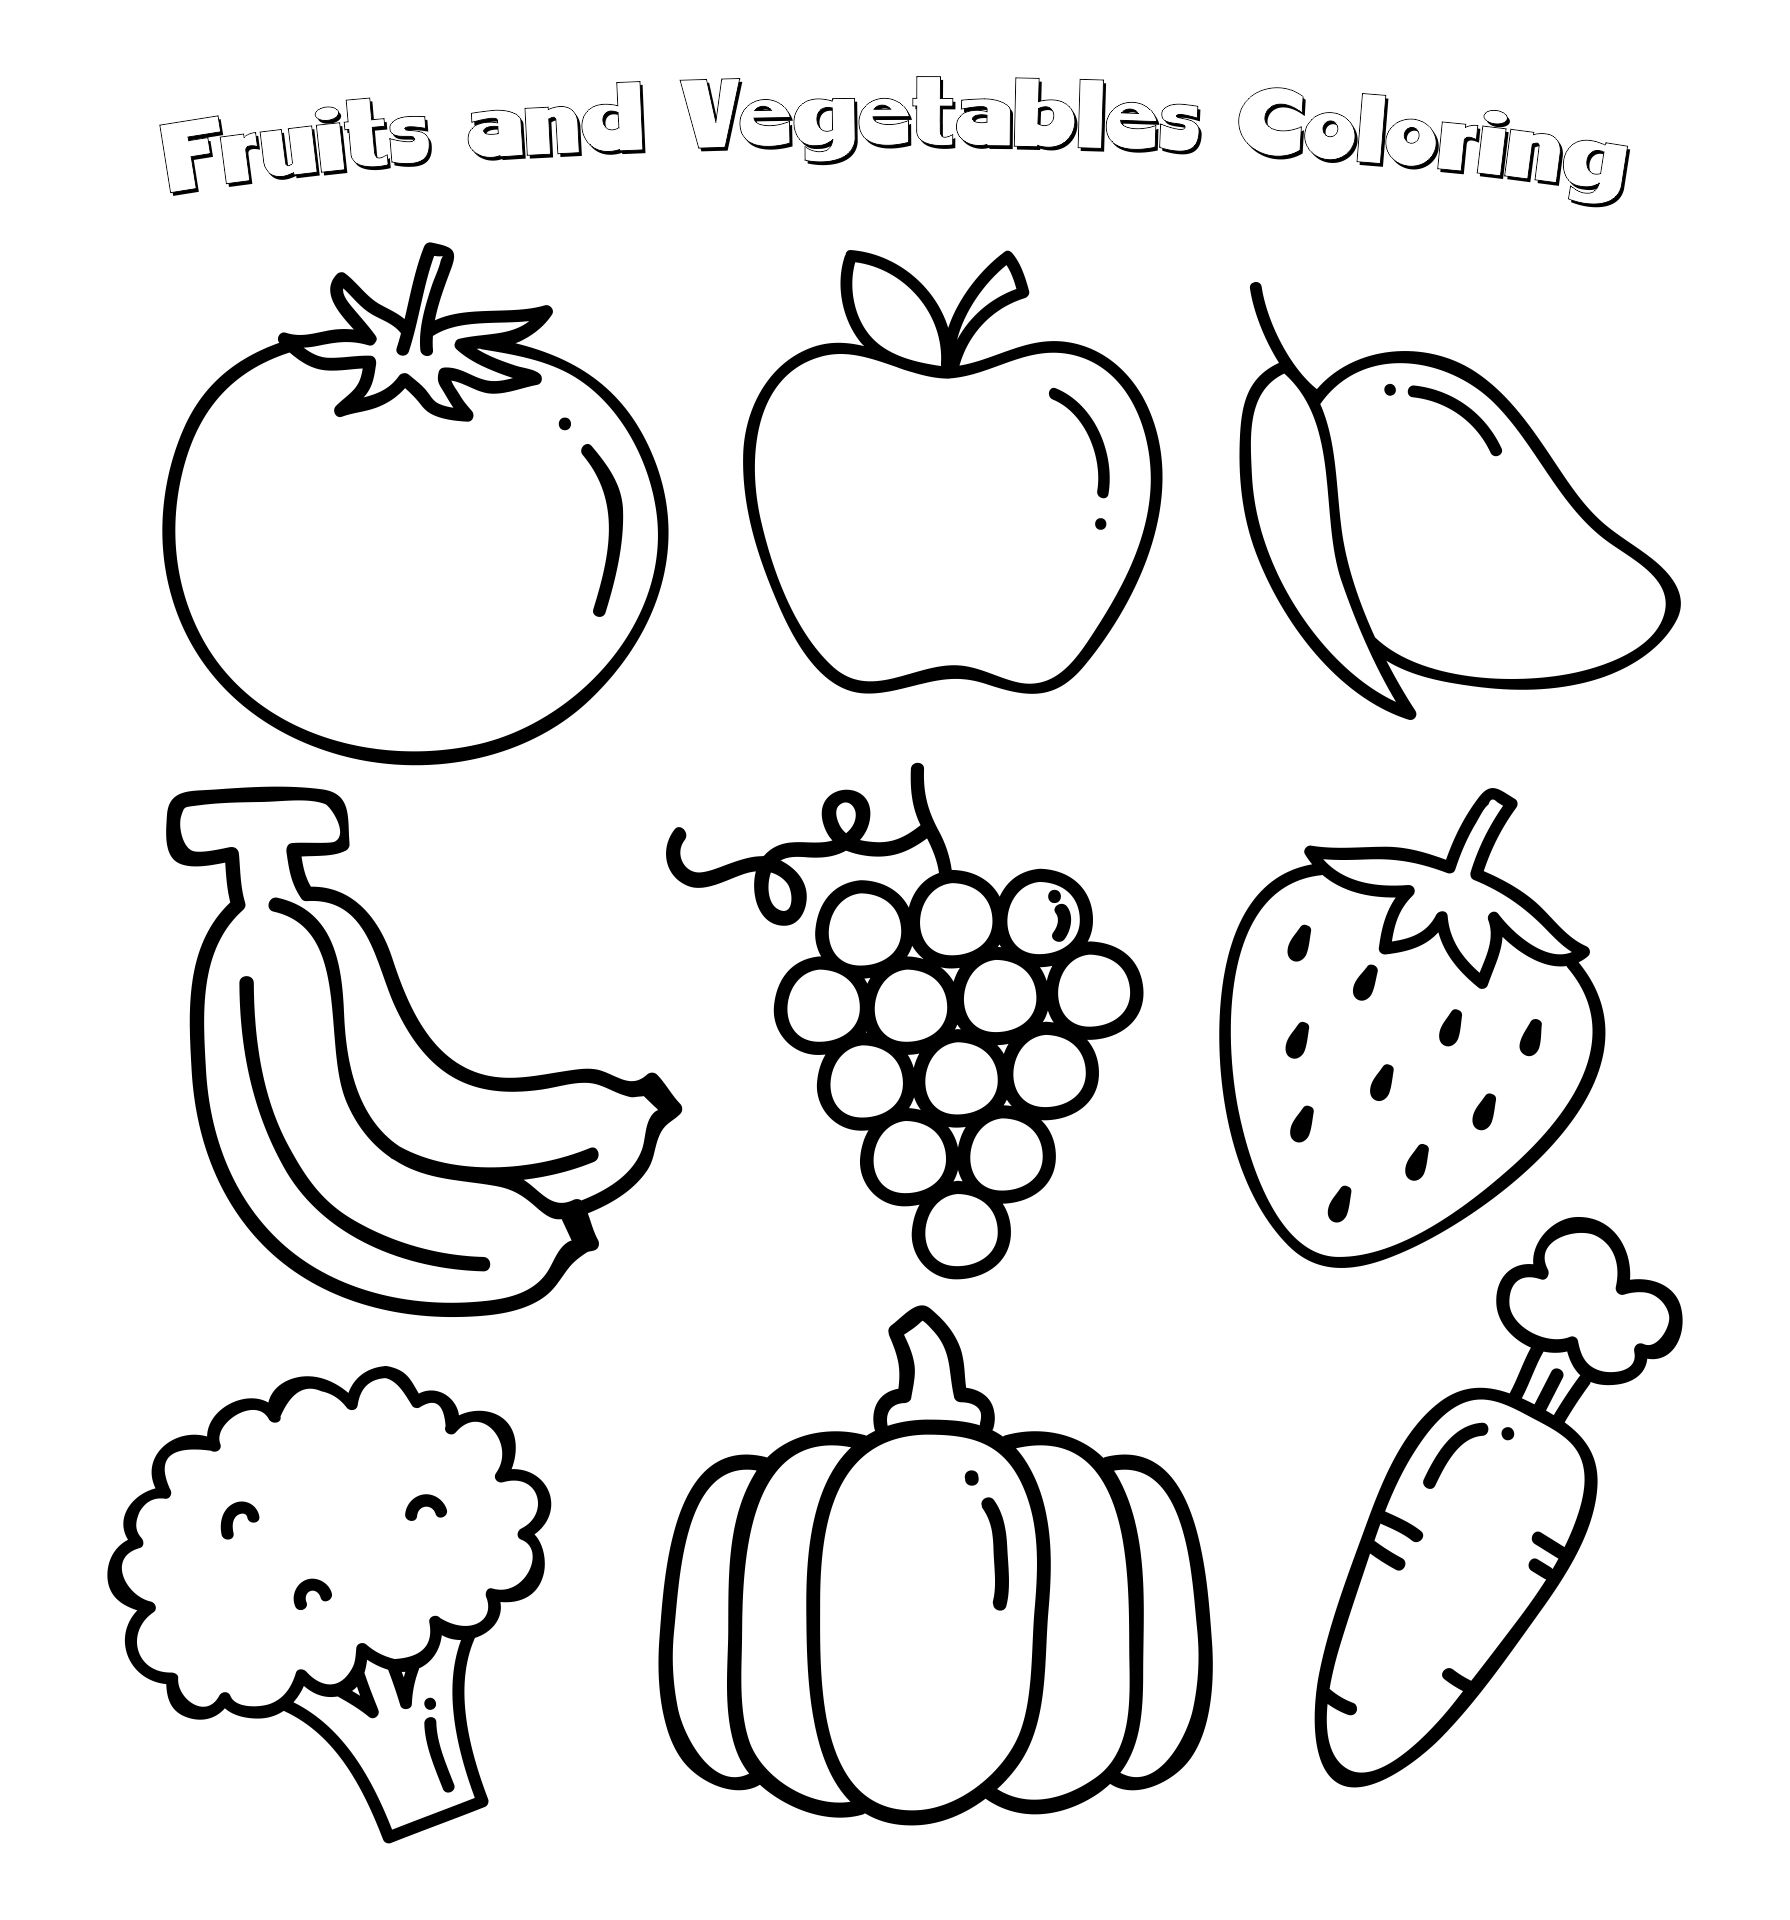 Free Printable Images Of Fruit And Vegetables